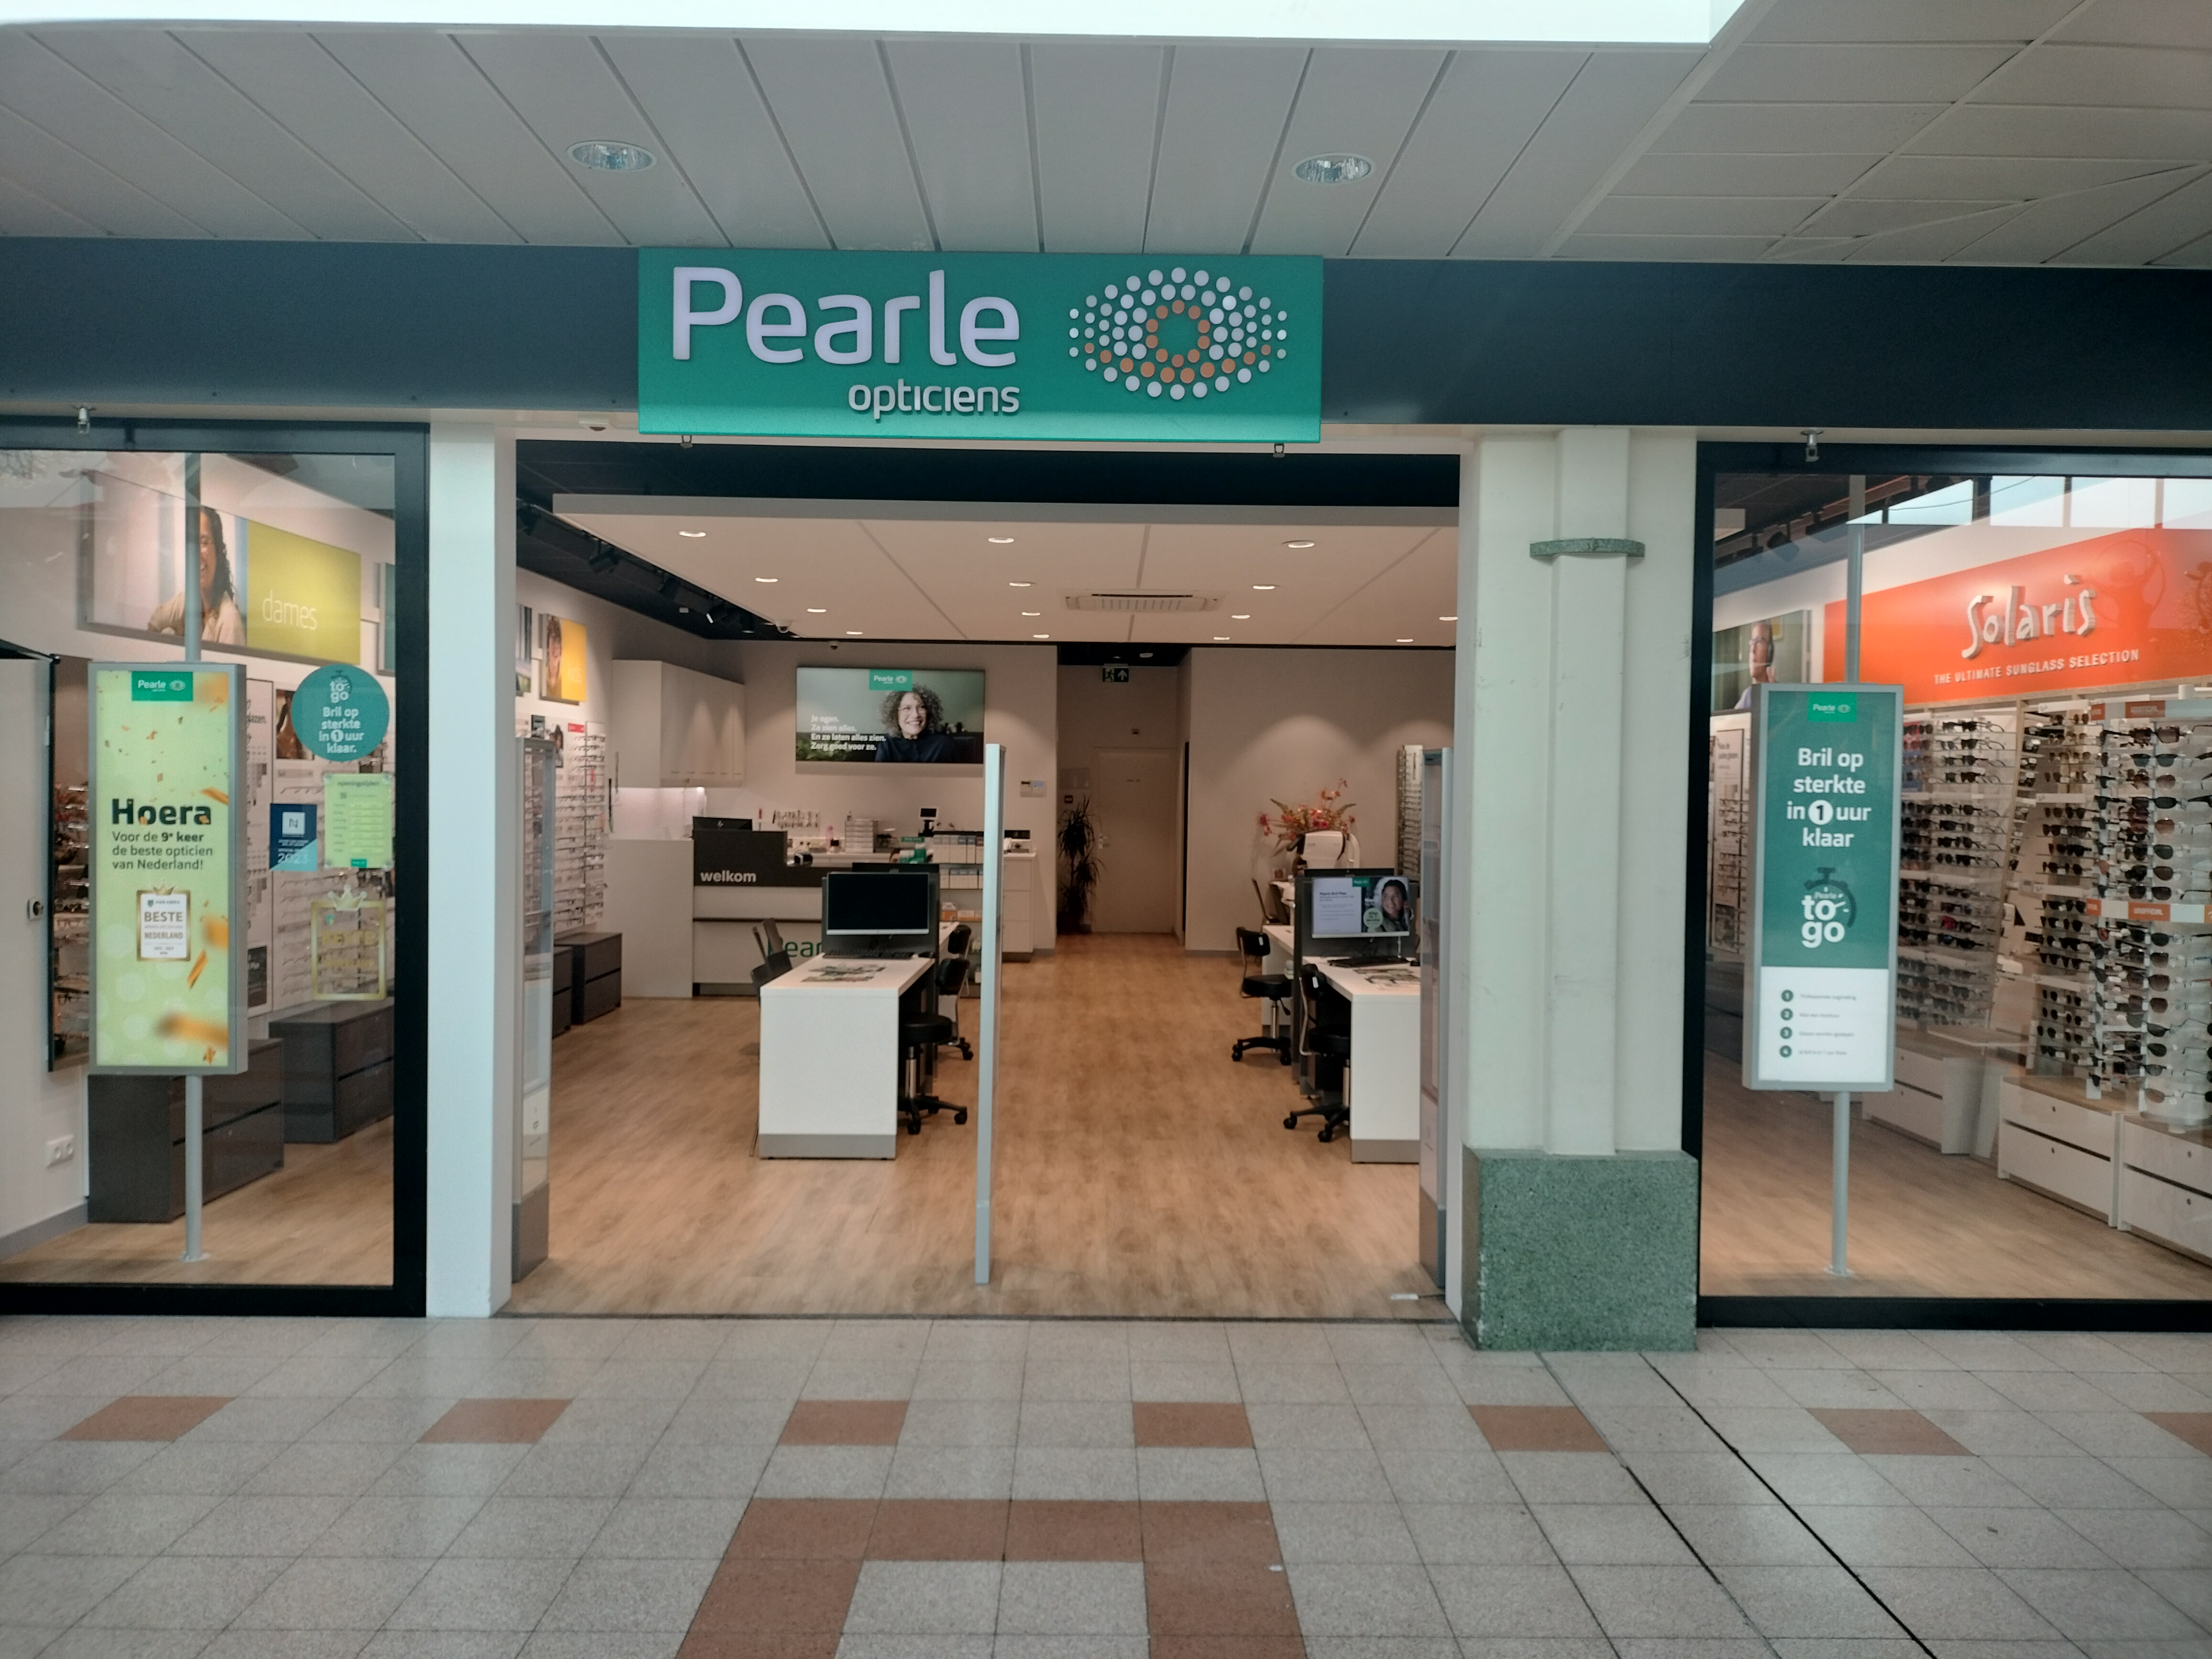 Pearle Opticiens Zwolle - Dobbe